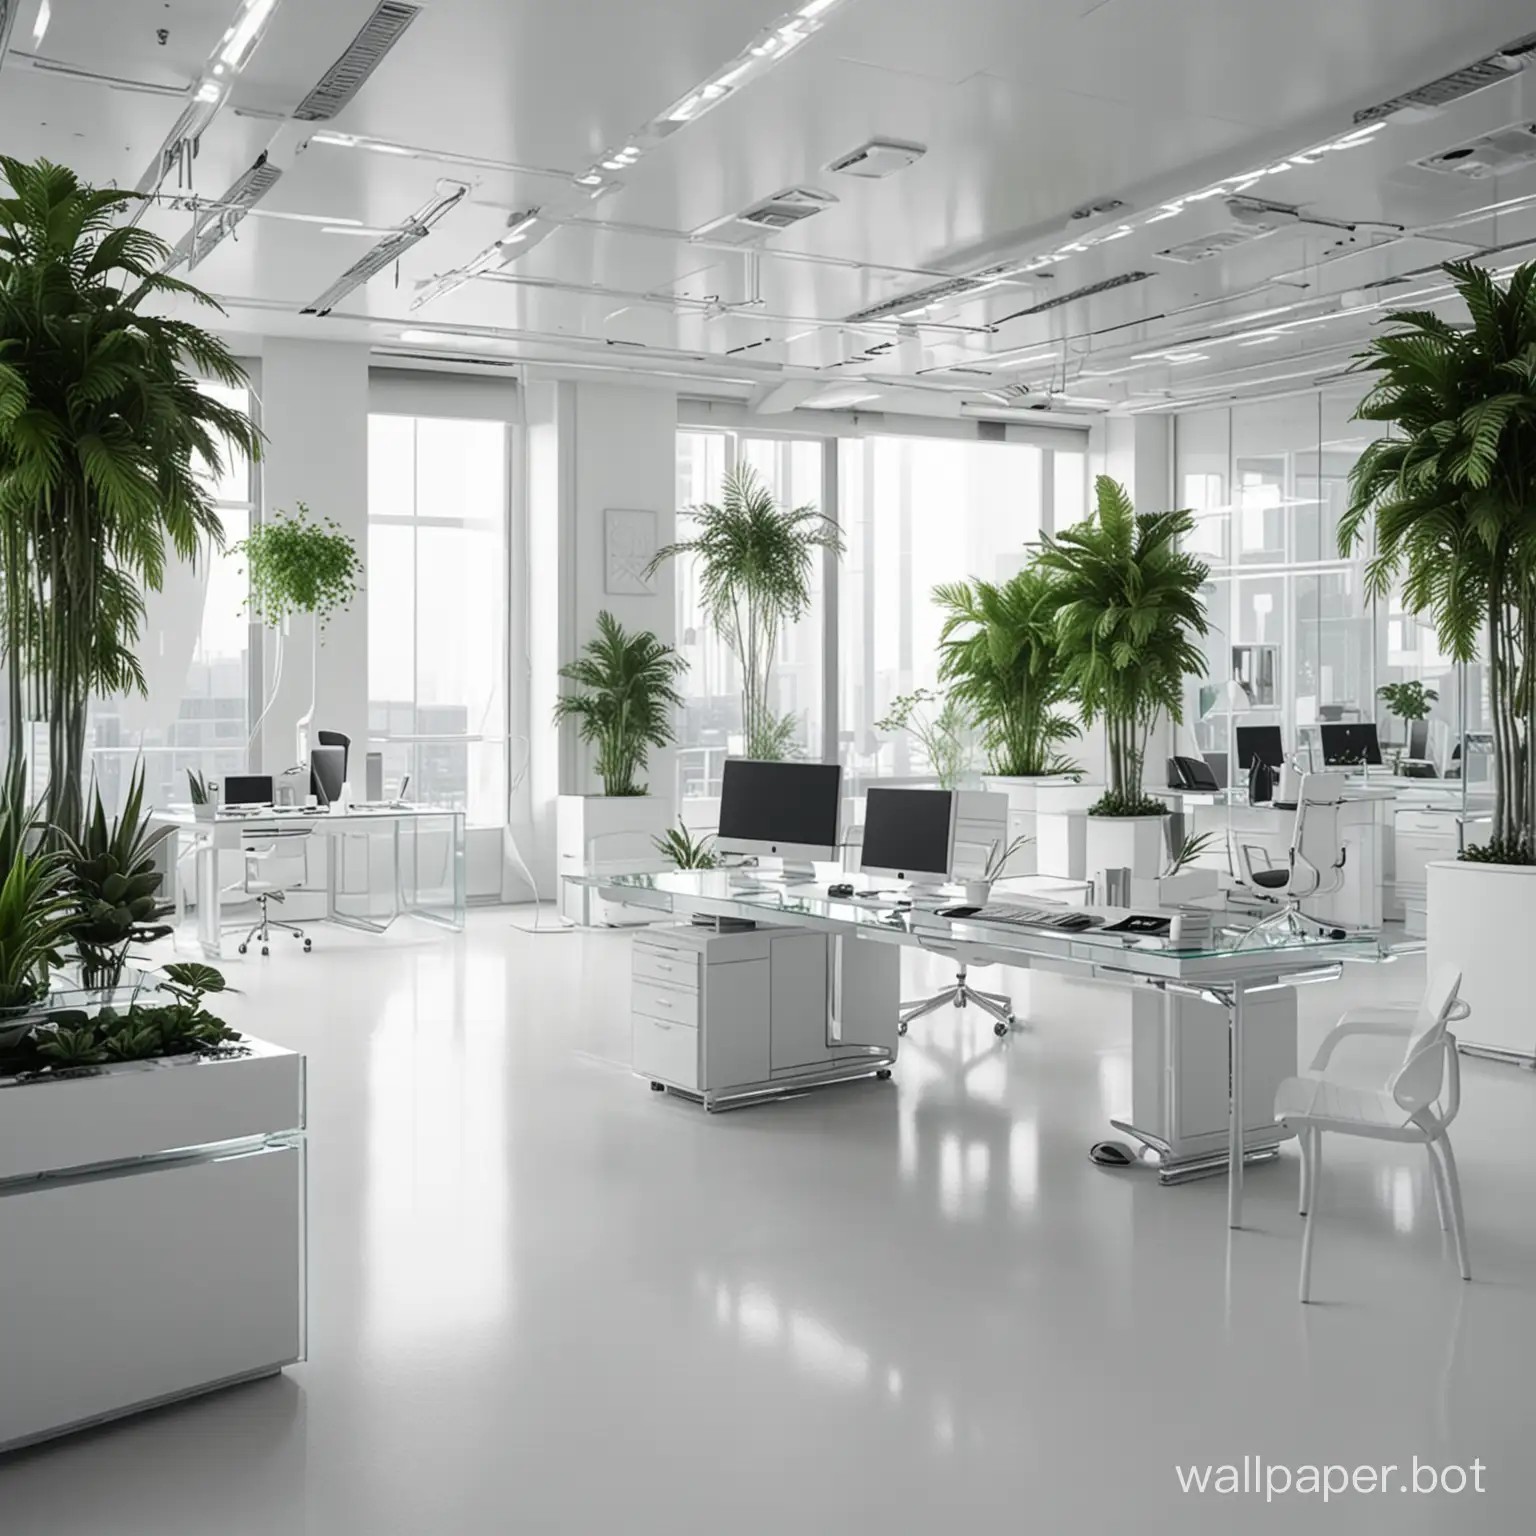 a futuristic, white room with office furniture, plants, glass walls, and computers reminiscent of early 2000s futurism, 1920x1080